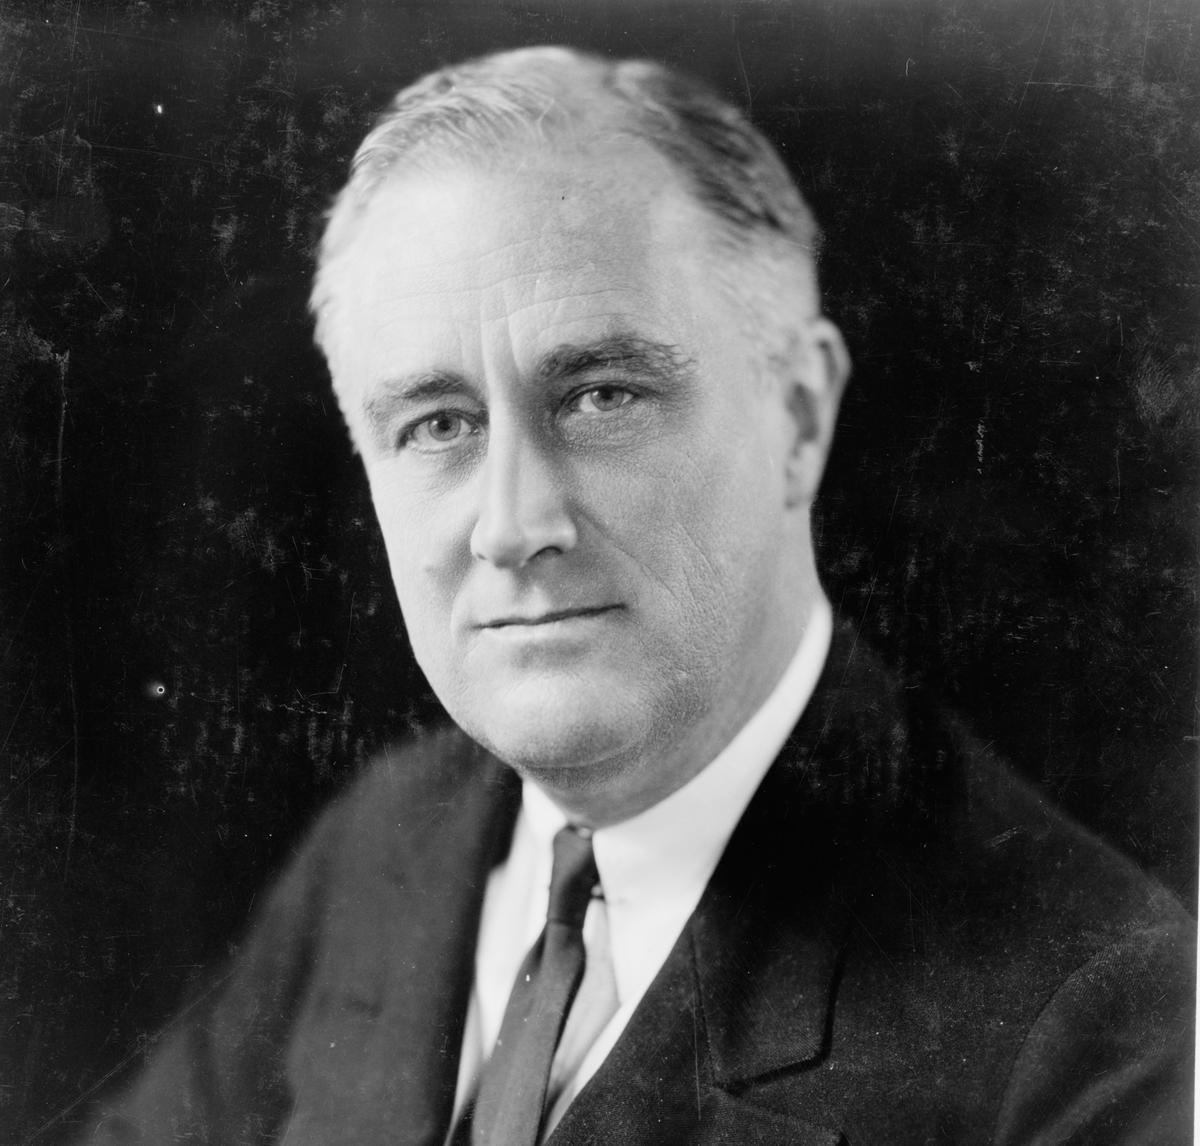 Image depicting President Franklin D. Roosevelt during a Thanksgiving celebration, showing the historical context of the text.